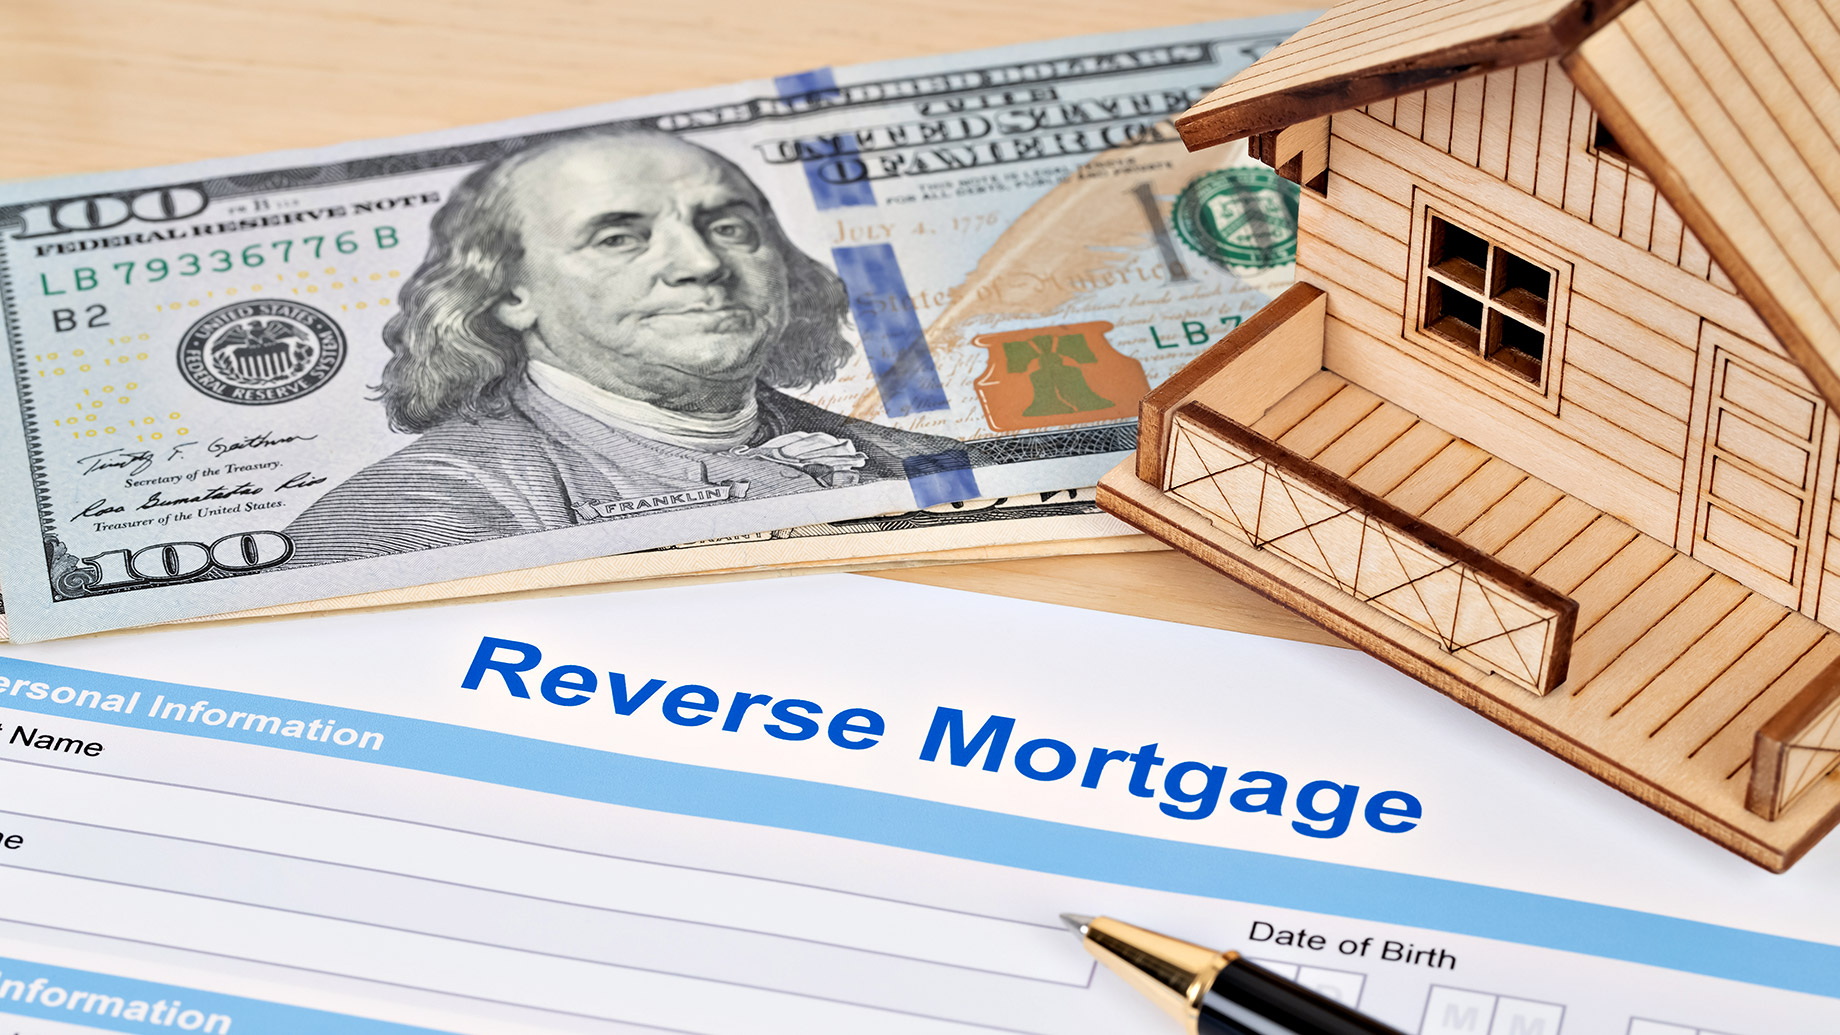 7 Important Things You Need To Know About Reverse Mortgages